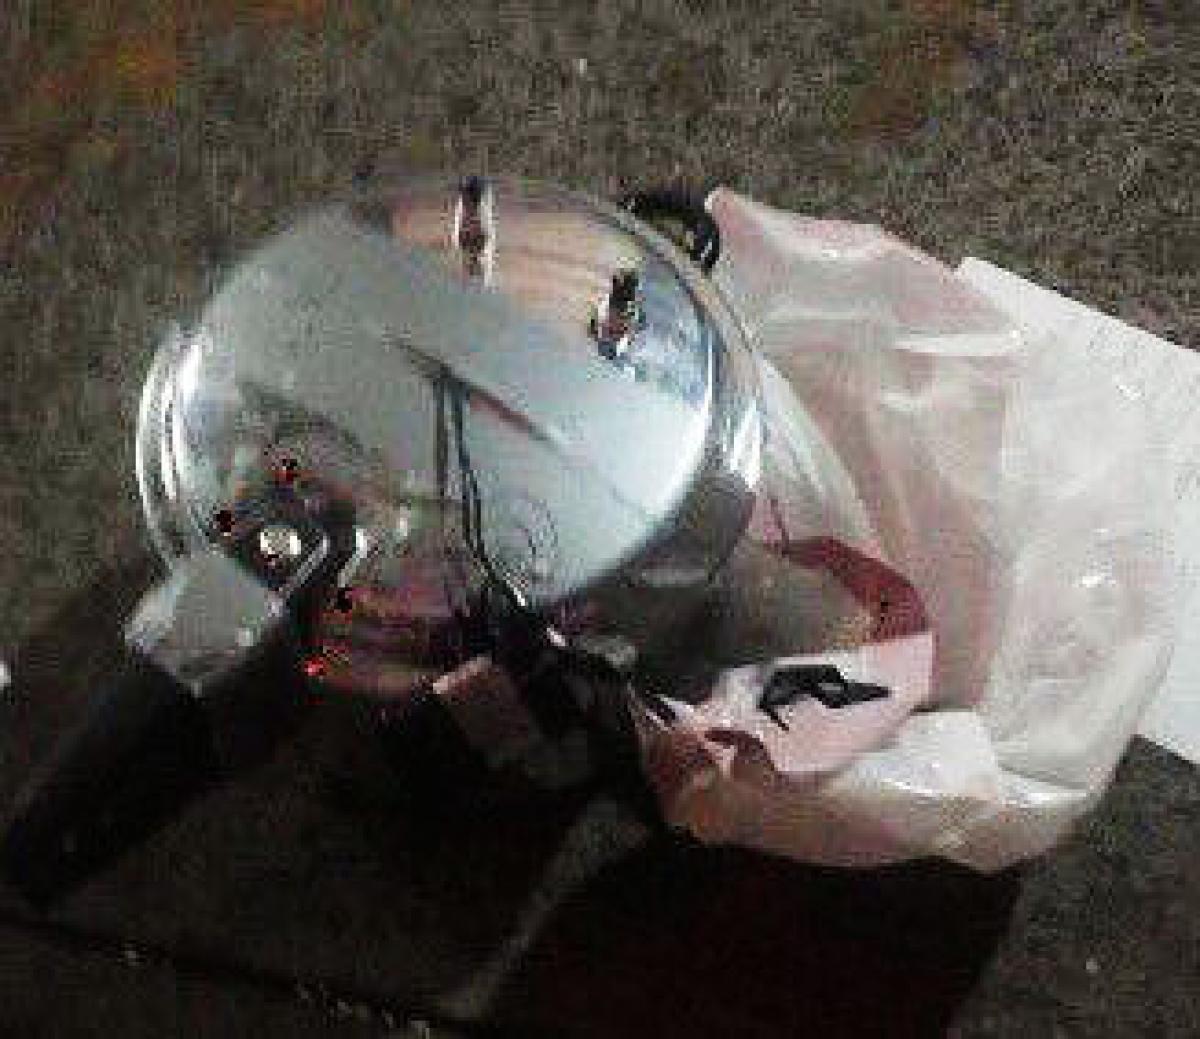 A pressure cooker bomb was found wrapped in a white garbage bag a few blocks from the first blast site. (Photo: NY Daily News)